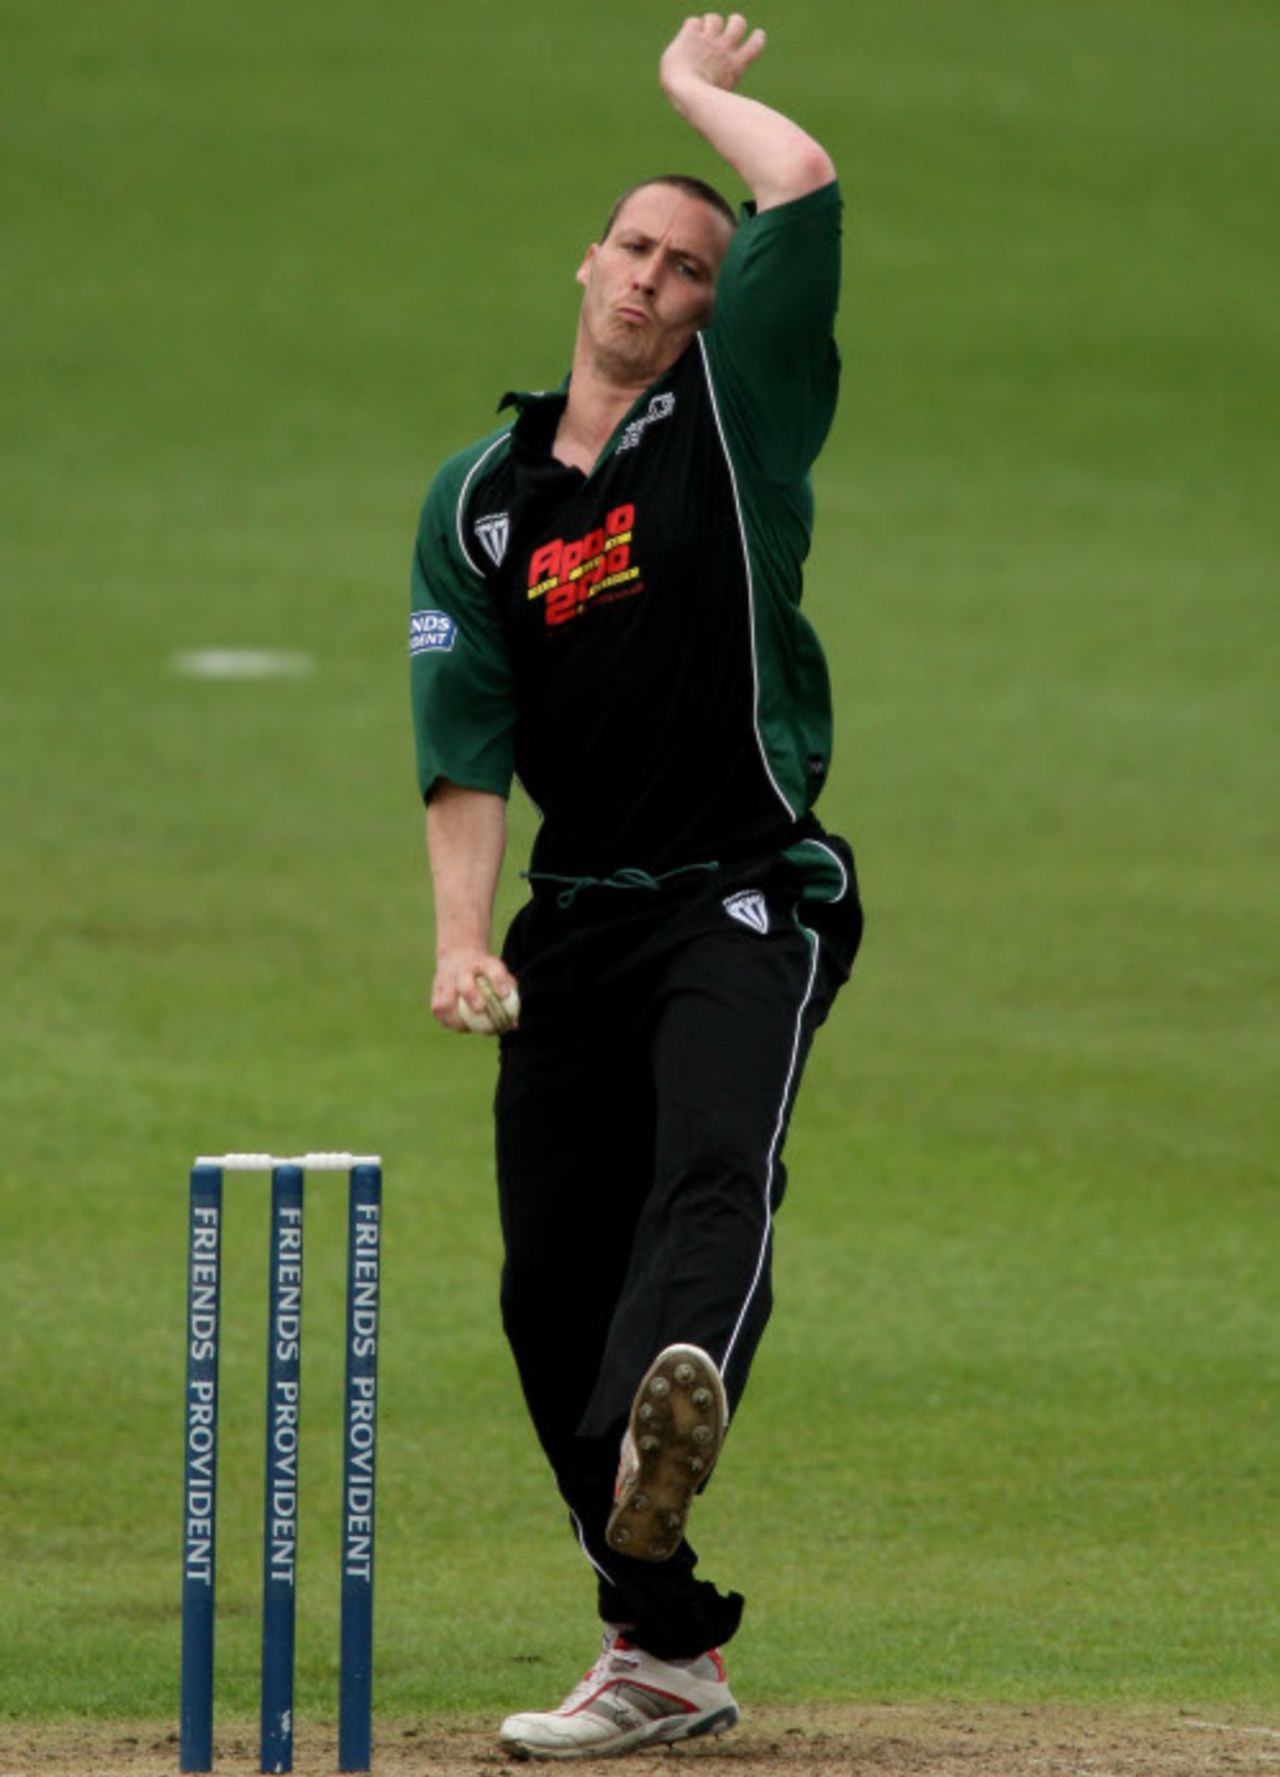 Simon Jones in his delivery stride, Worcestershire v Glamorgan, Friends Provident Trophy, New Road, May 5, 2008